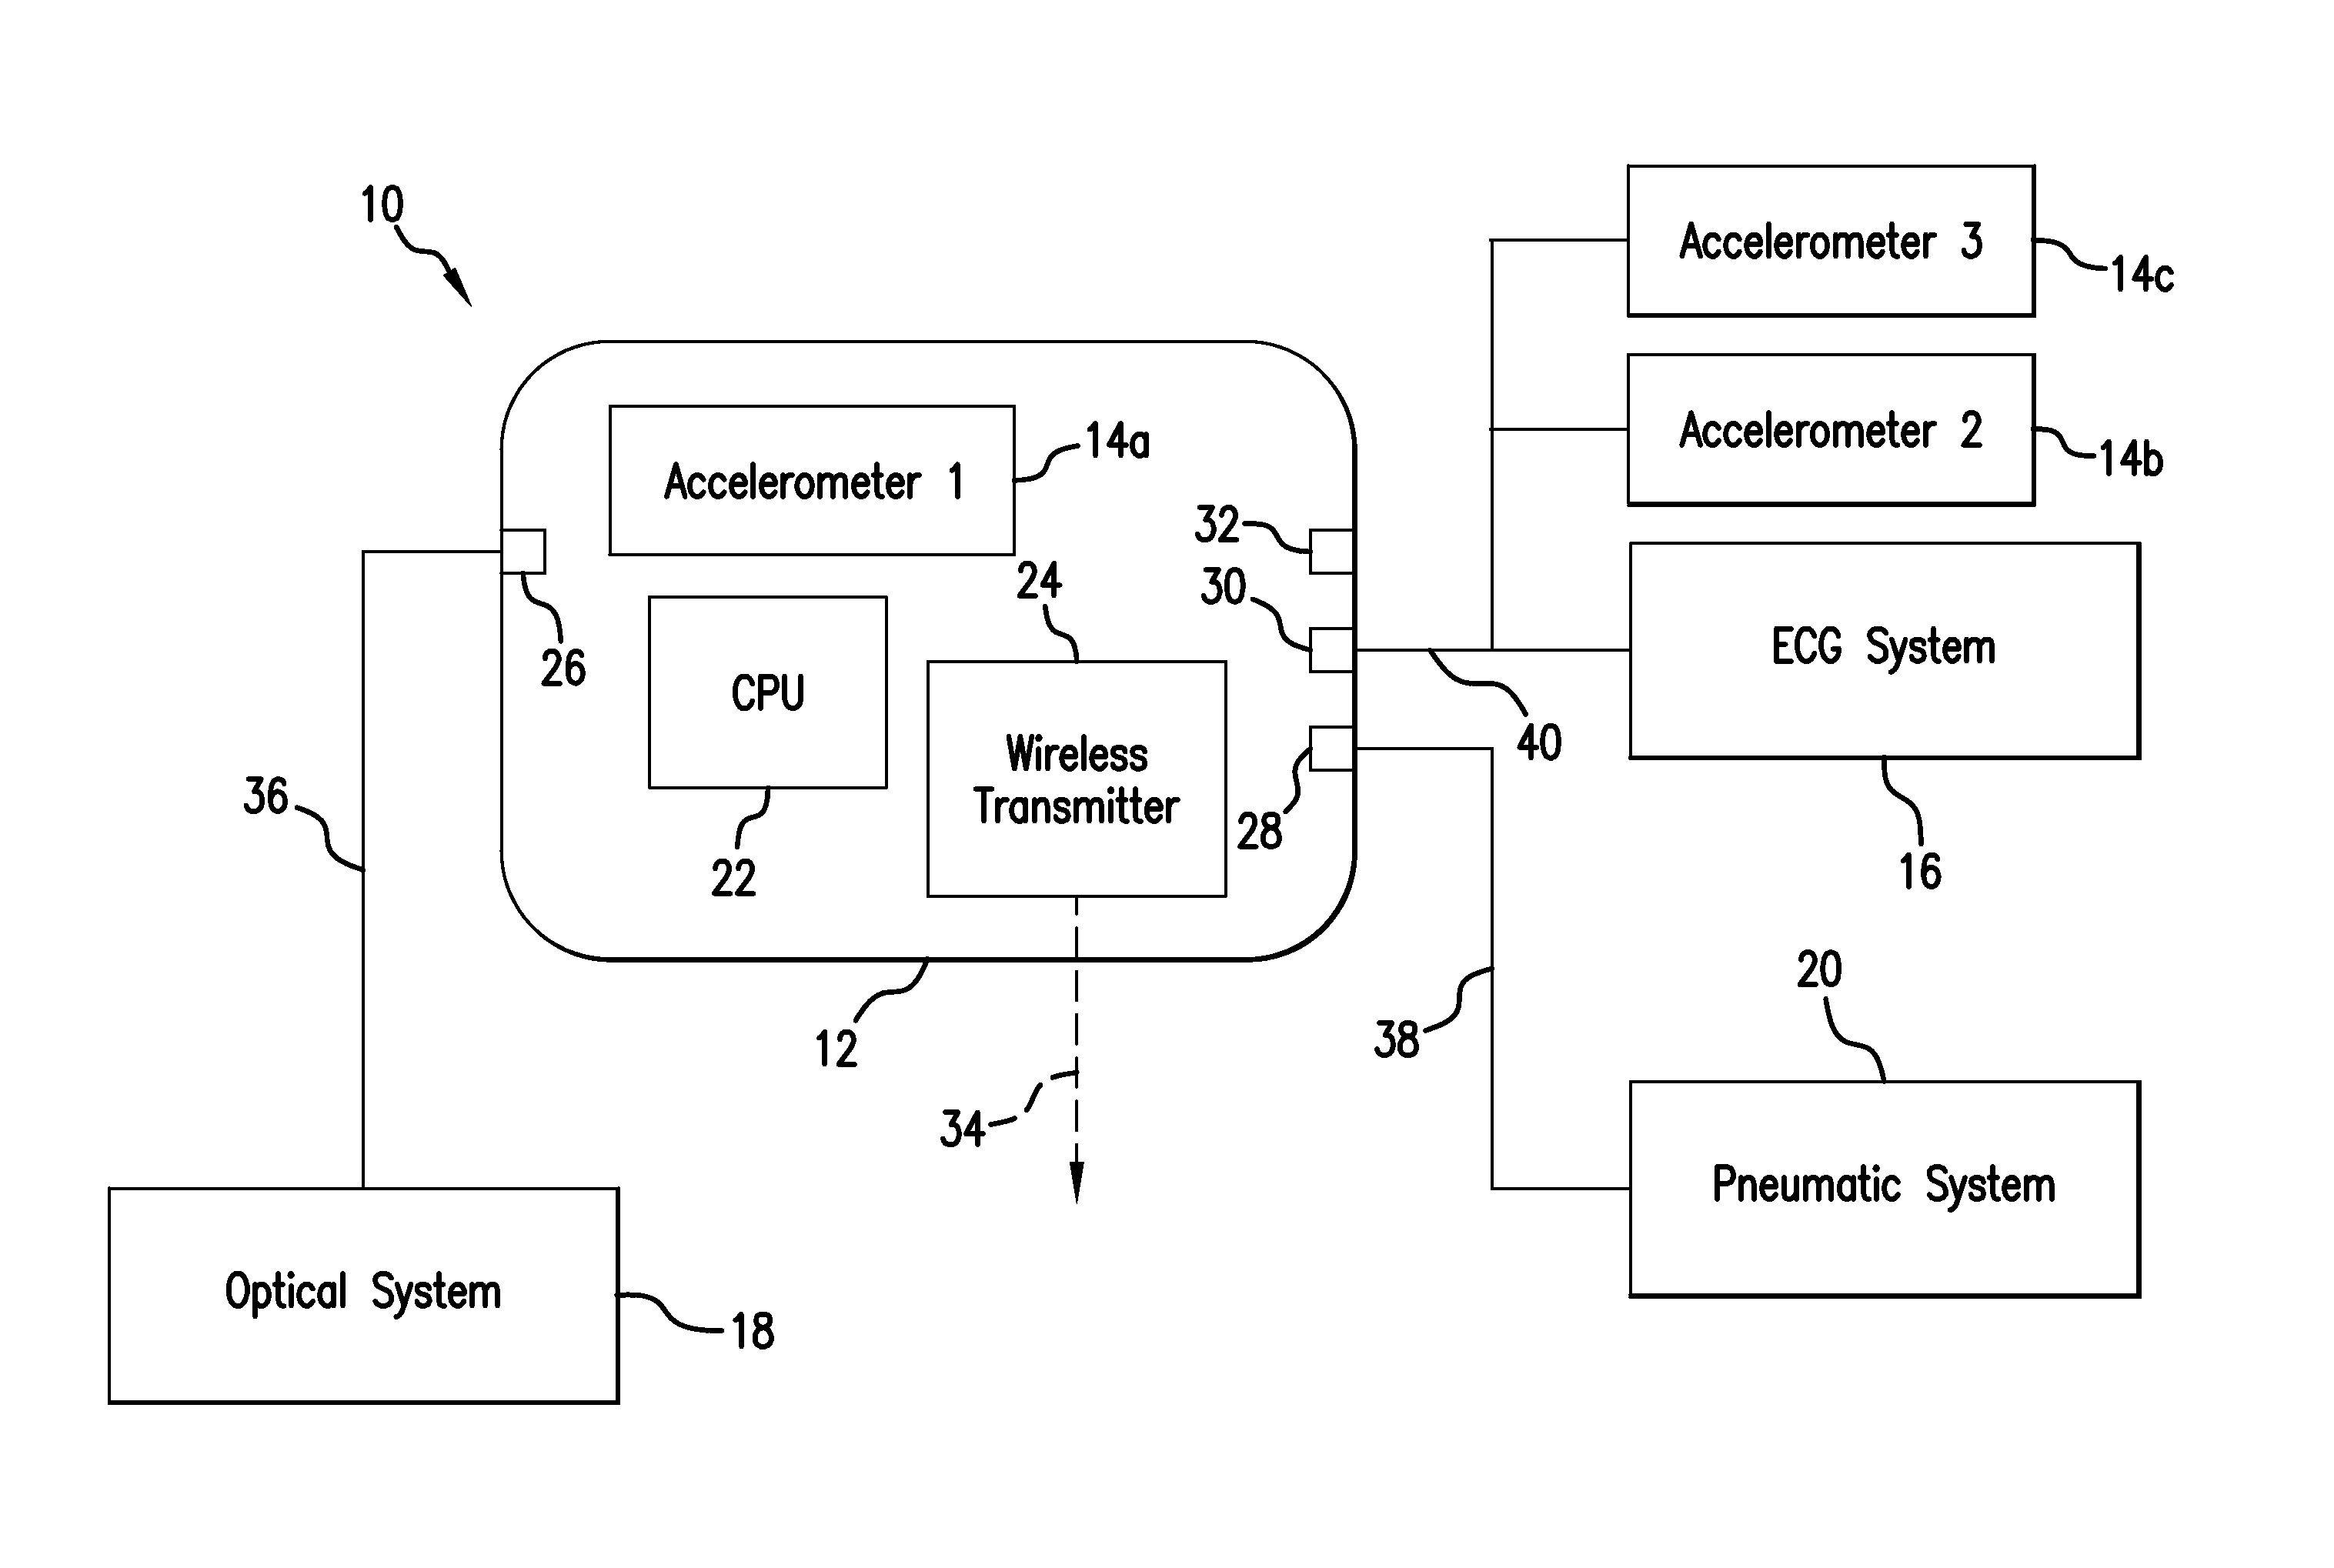 Graphical mapping system for continuously monitoring a patient's vital signs, motion, and location